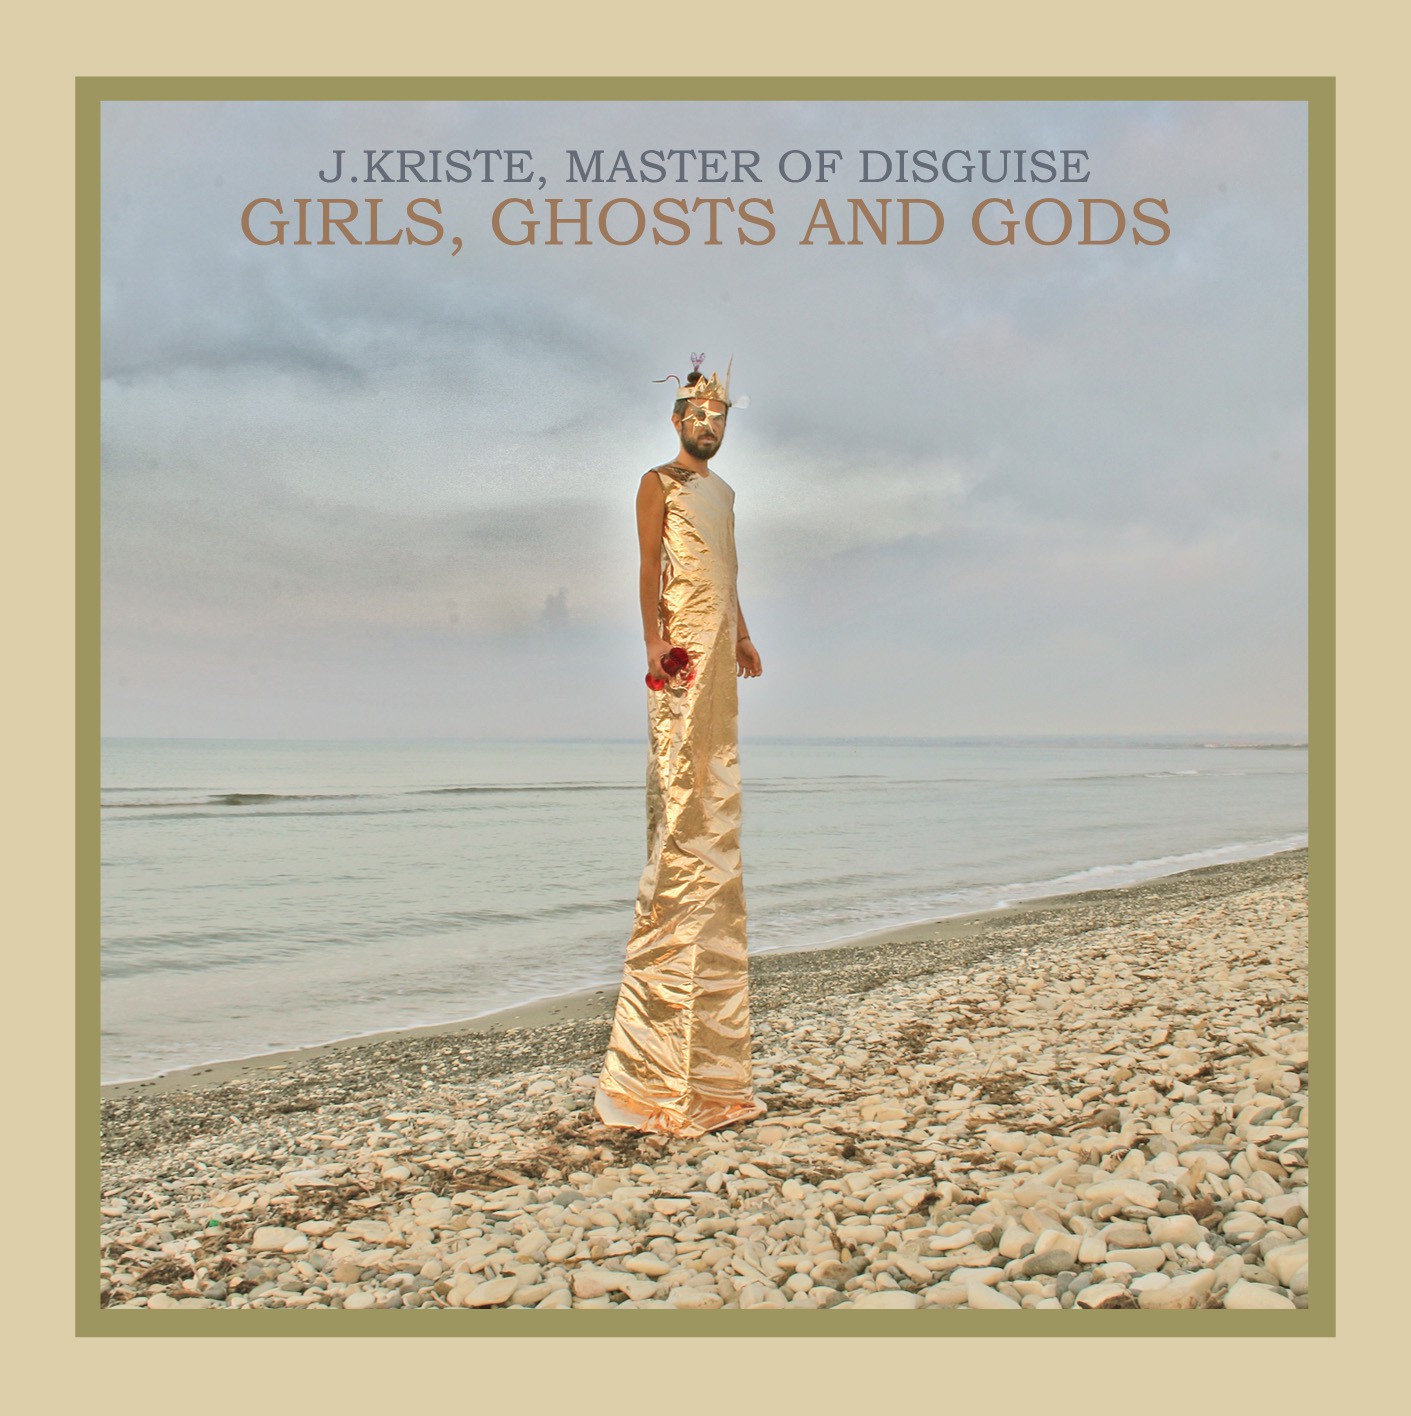 J. KRISTE, MASTER OF DISGUISE-GIRLS, GHOSTS AND GODS